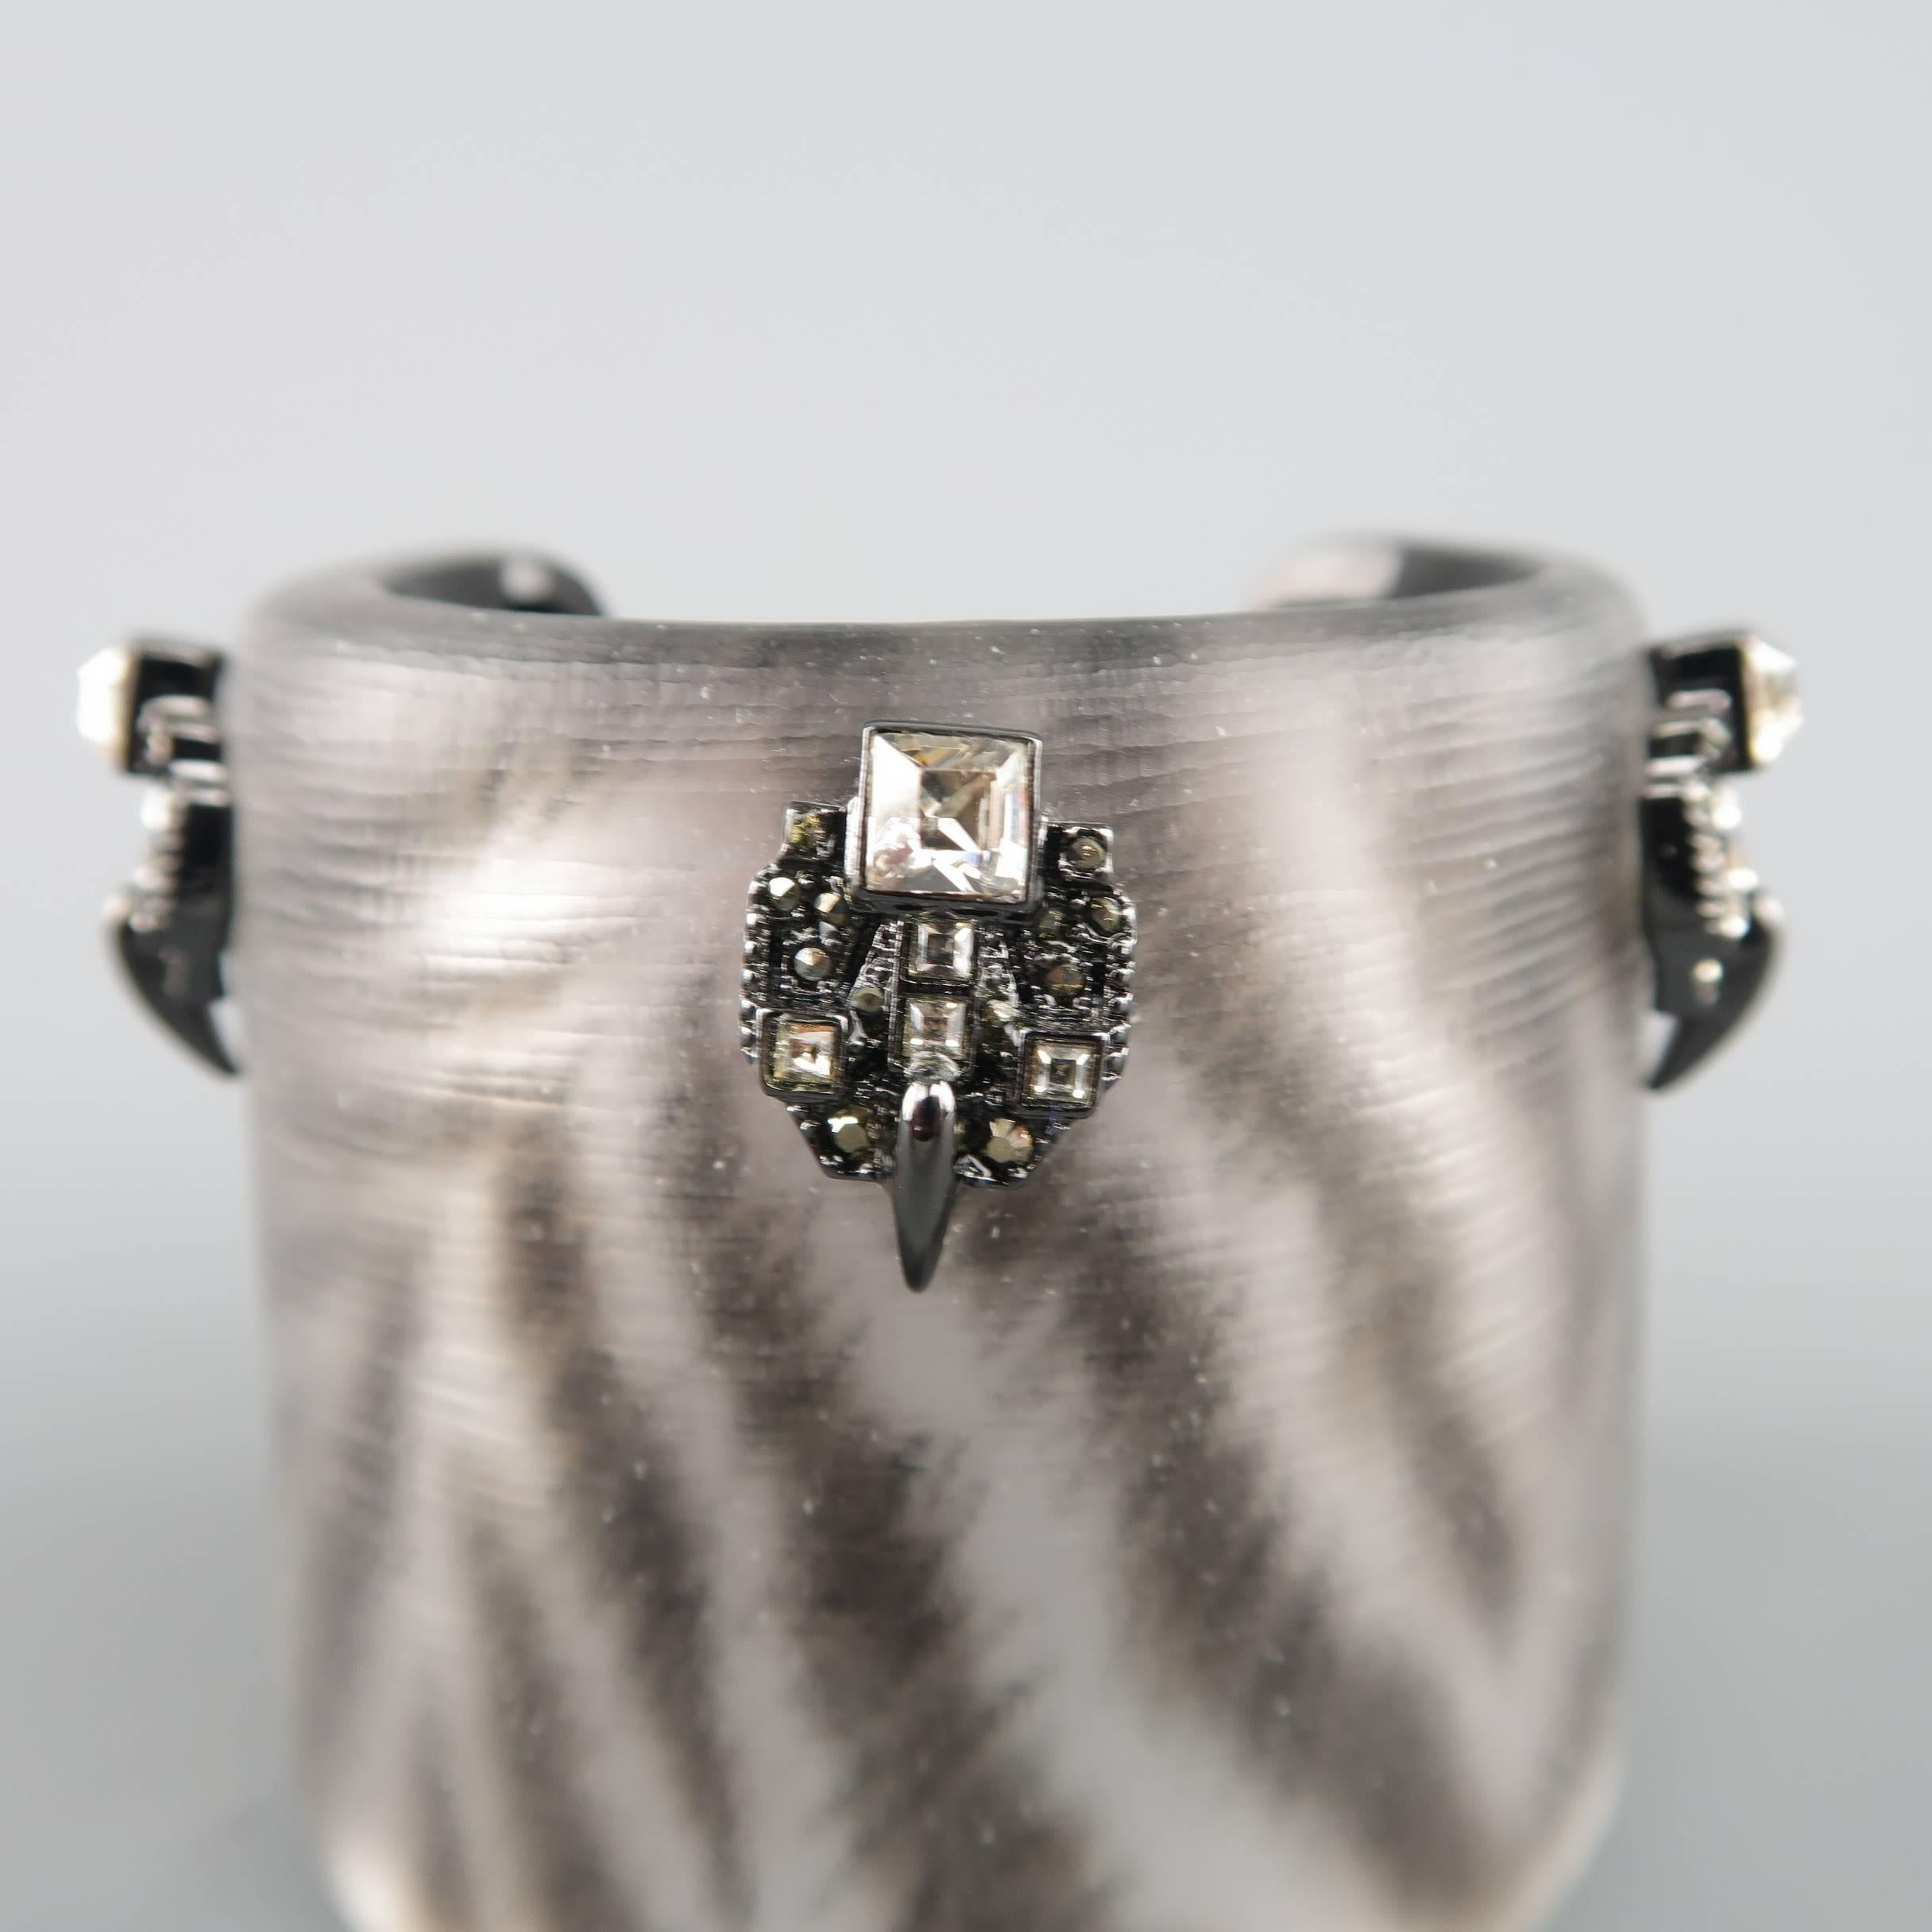 This gorgeous Alexis Bittar cuff bracelet from the Santa Fe Deco collection comes in silver metallic zebra print lucite with rhinestone crystal studded gunmetal adornments. Made in USA.
 
Excellent Pre-Owned Condition.
 
Length: 2.5 in.
Fits: 6.5